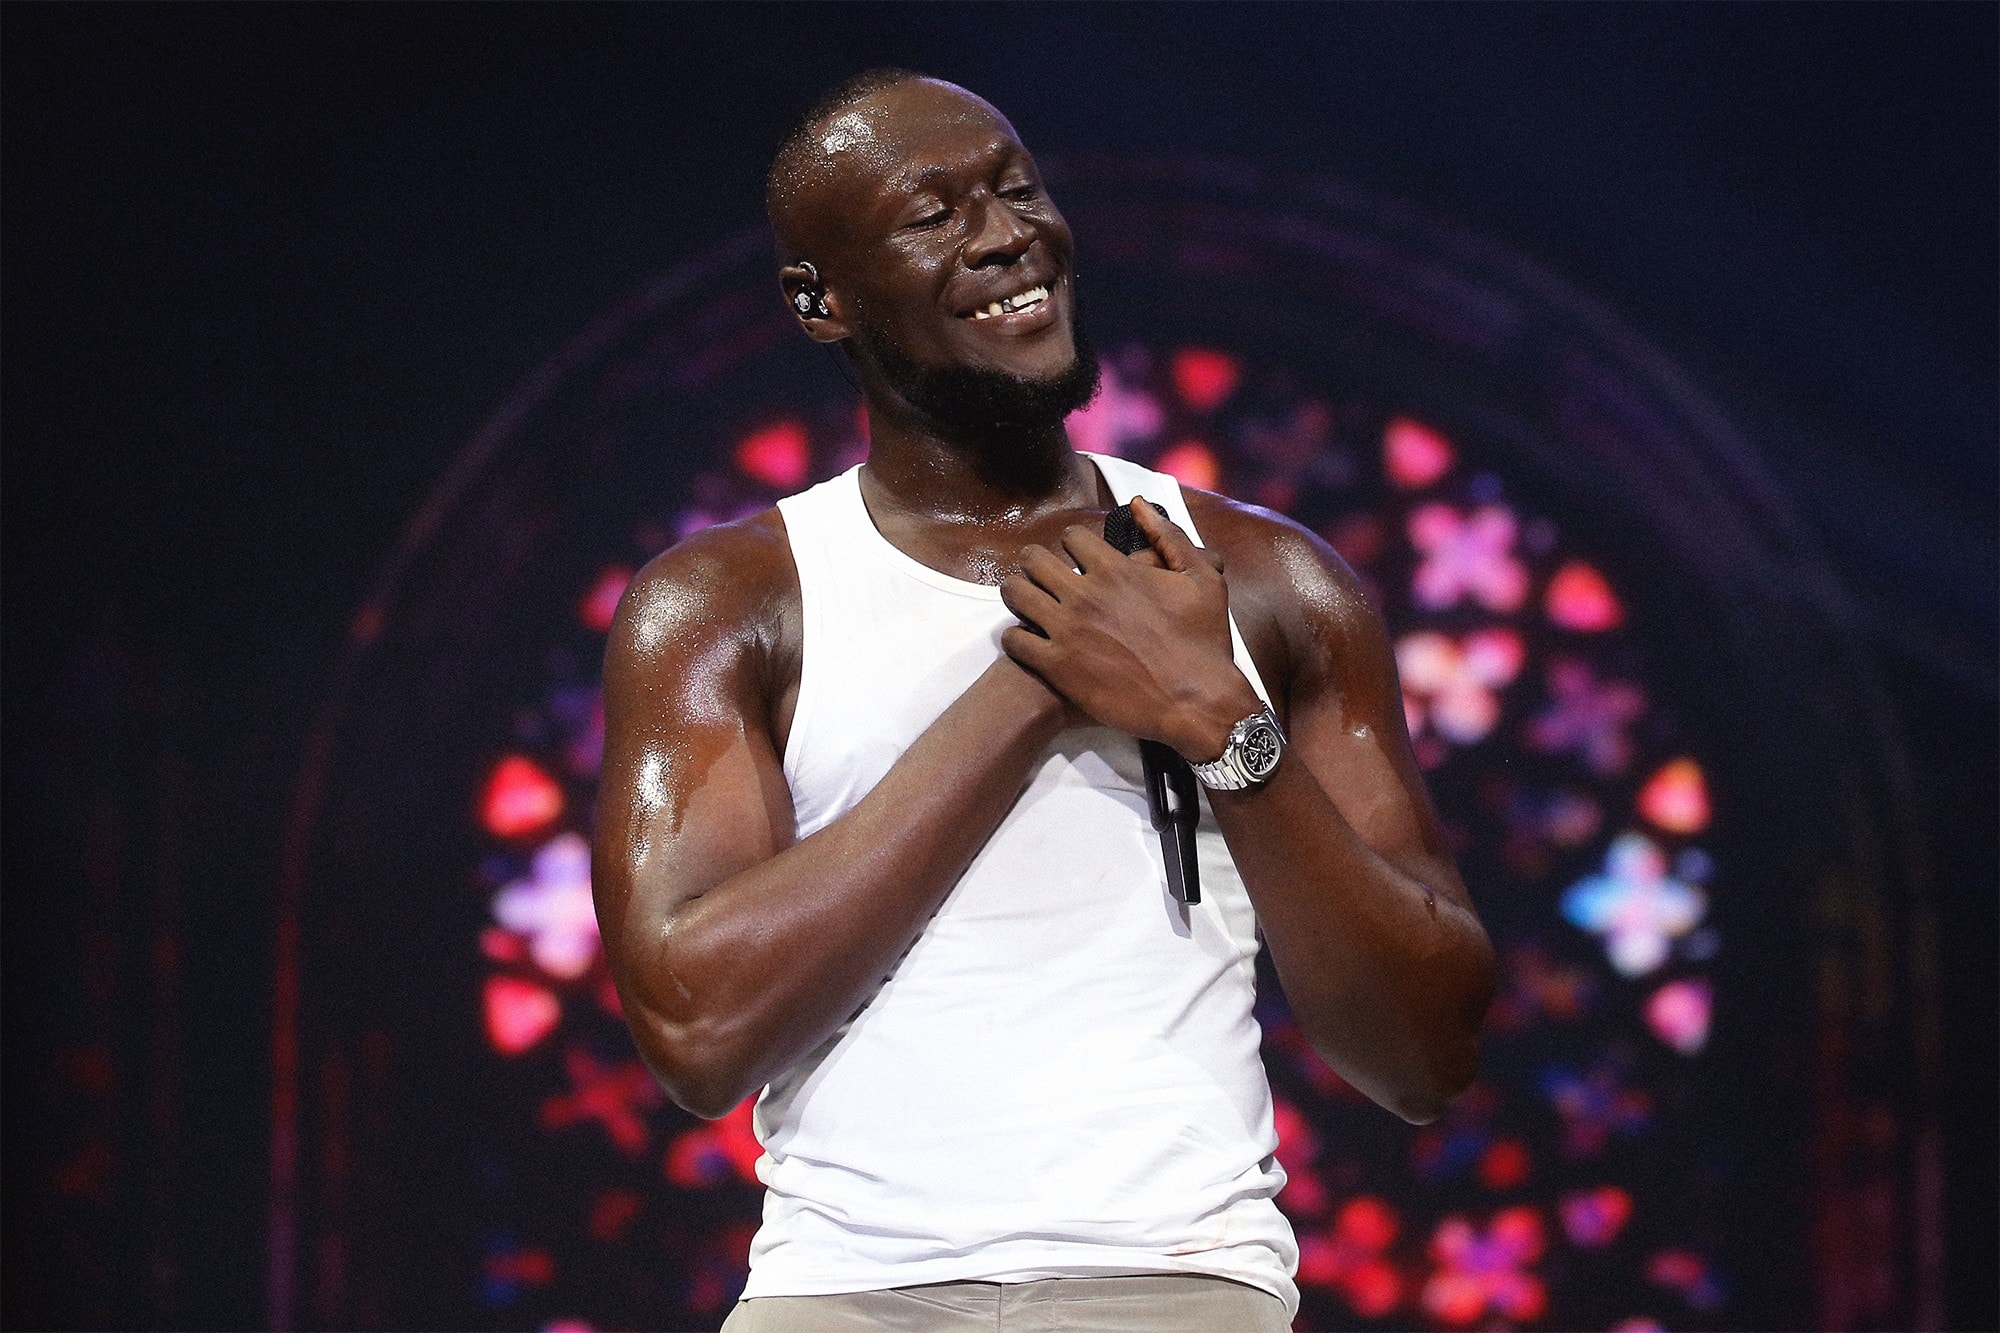 Stormzy Donates 500,000 GBP Pounds to Education Scholarships Rapper Charity Giving Back Income Inequality Higher Learning Education Reform HYPEBEAST Music News UK London Grime England